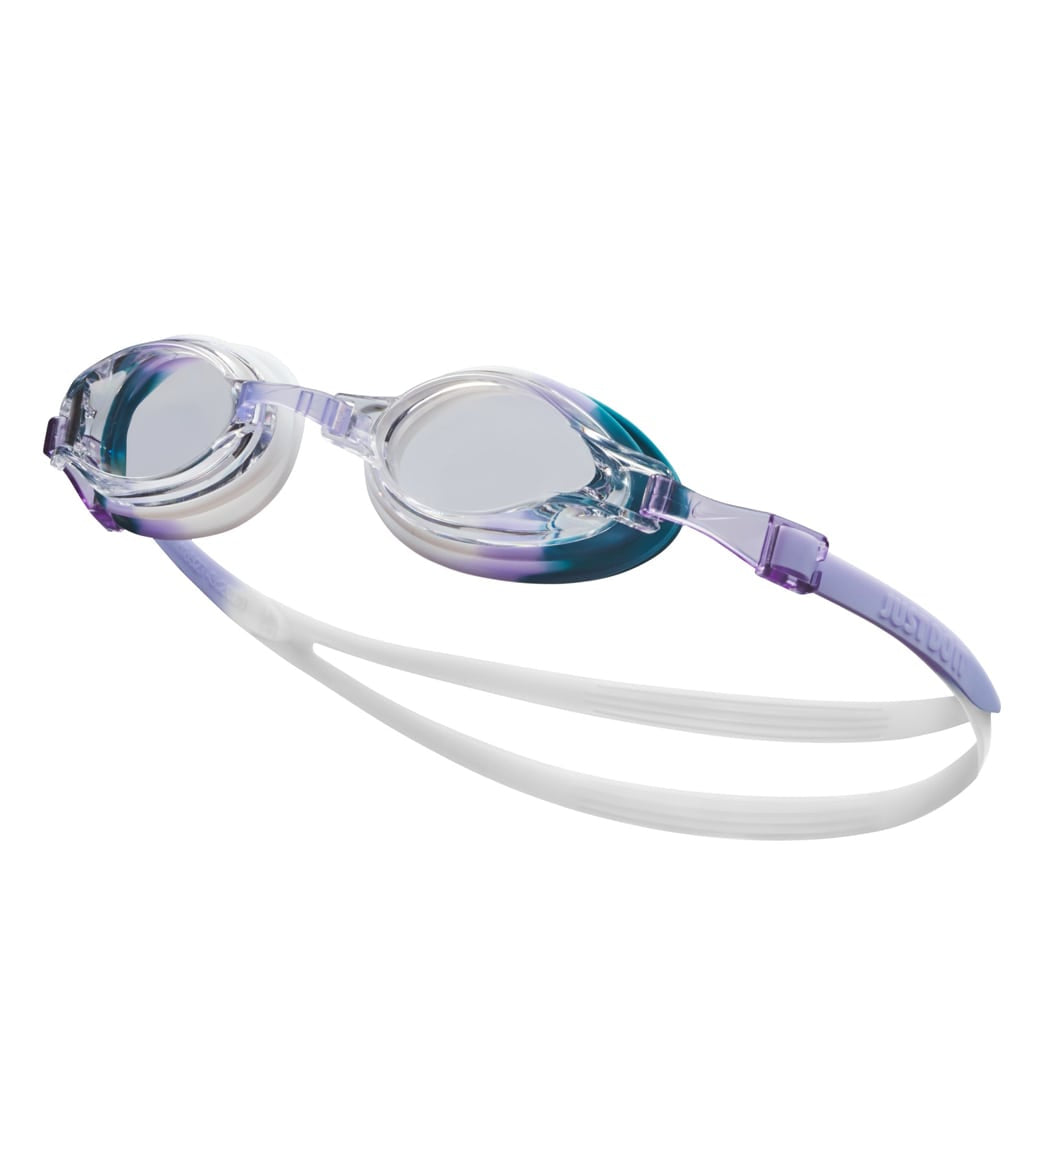 Nike Youth Chrome Goggle at SwimOutlet.com